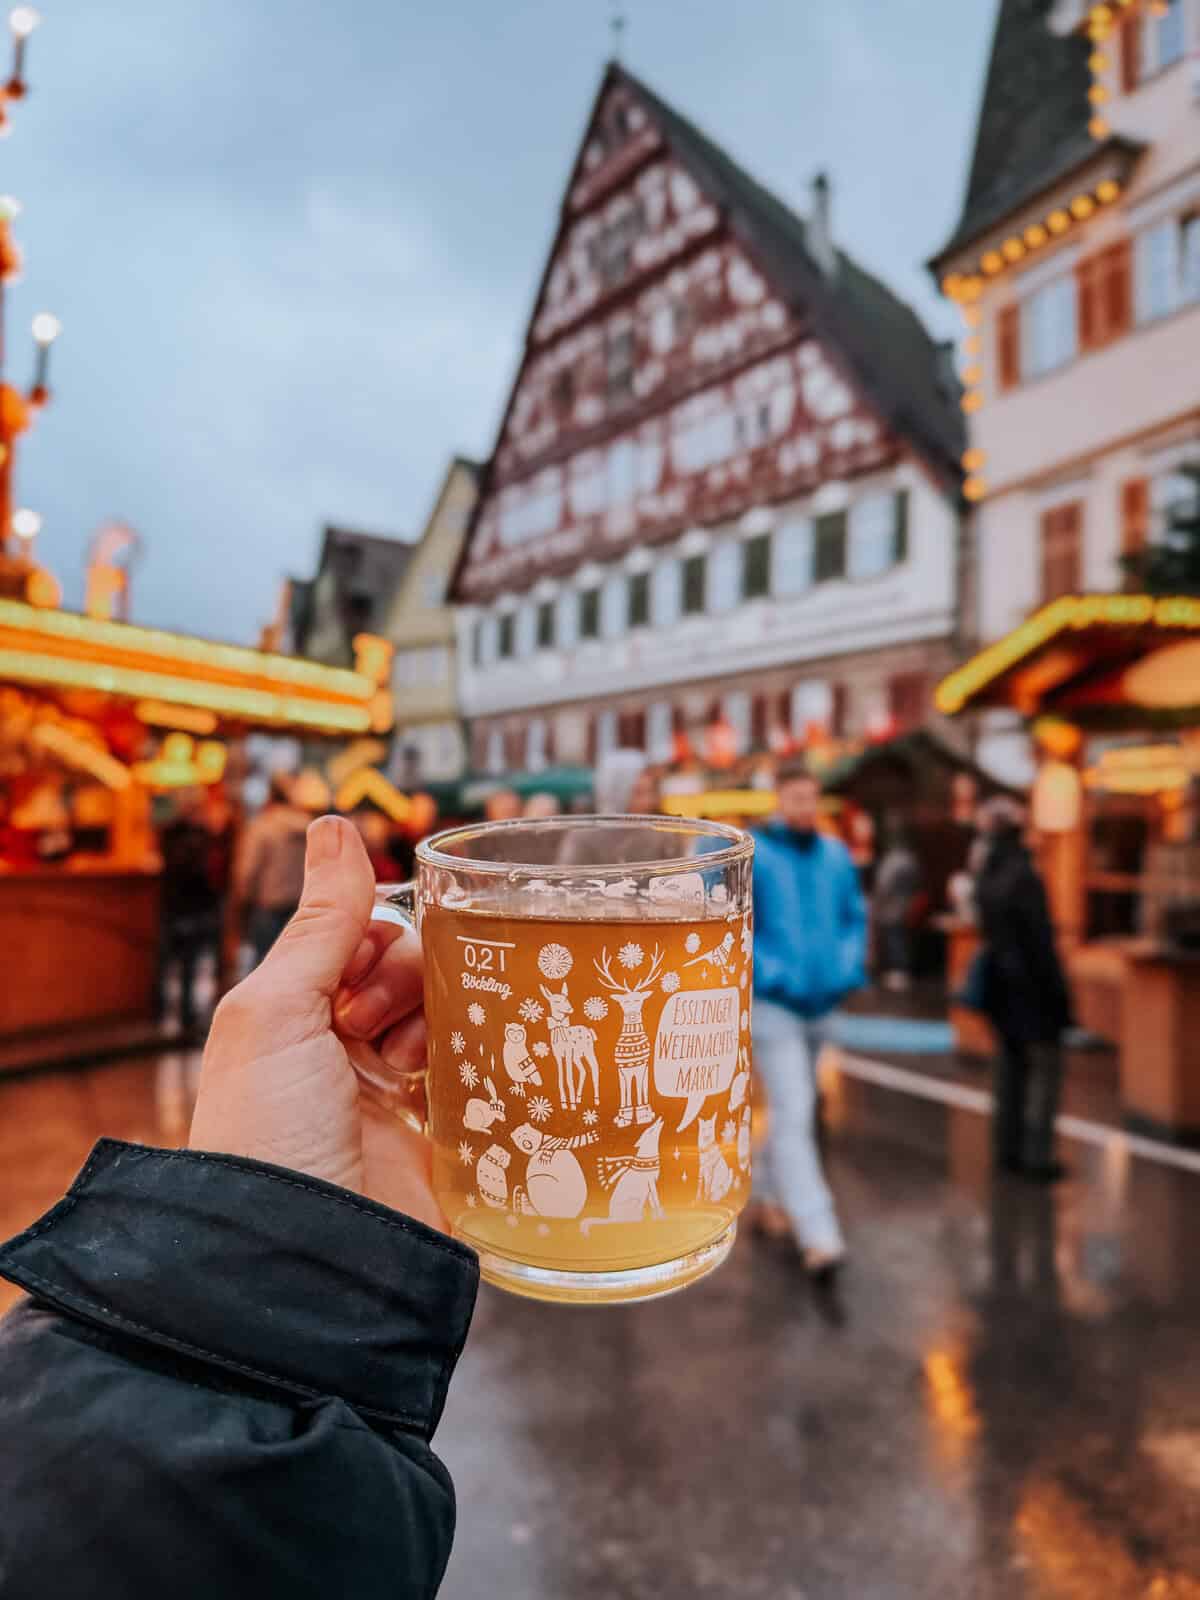 Close-up of a hand holding a glass mug filled with steaming Glühwein at the Esslingen Christmas Market, with festive illustrations and market name on the cup